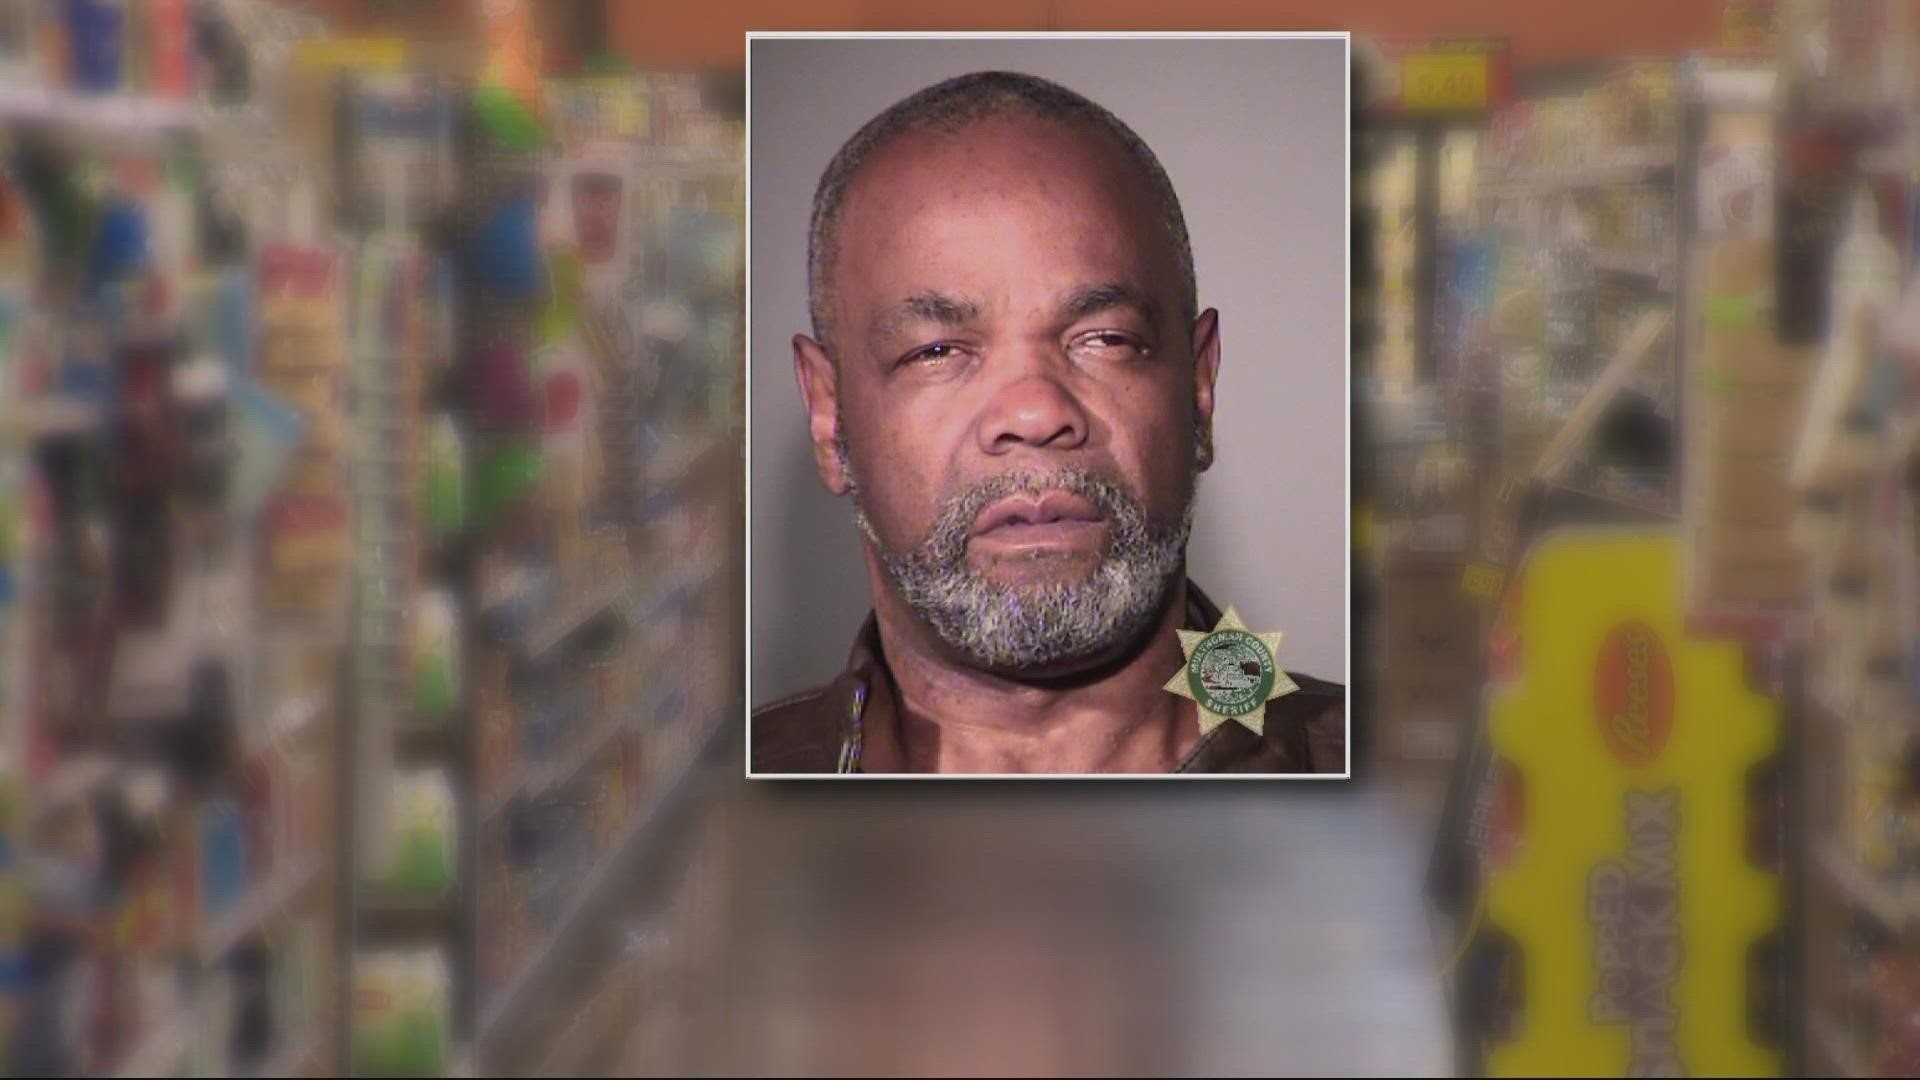 A Multnomah County judge sentenced one of Portland’s most prolific shoplifters, Barry Sanders, to four years in prison.